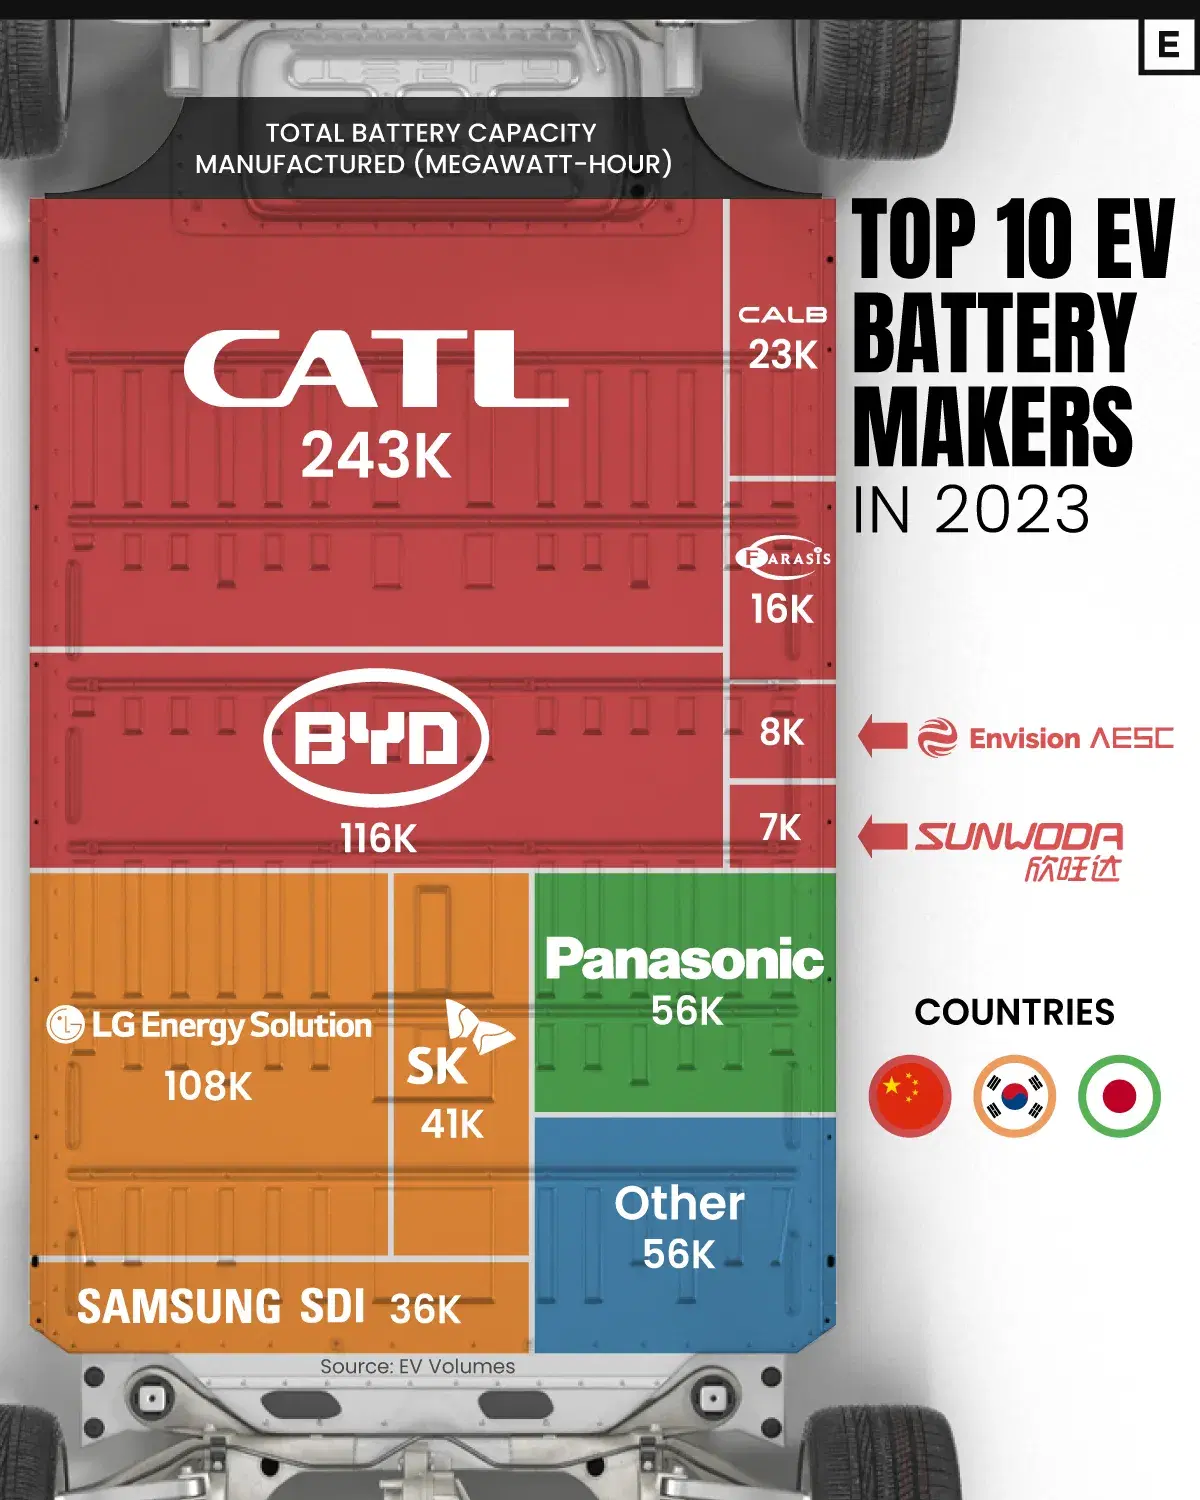 All Major EV Battery Manufacturers Are Based in Asia